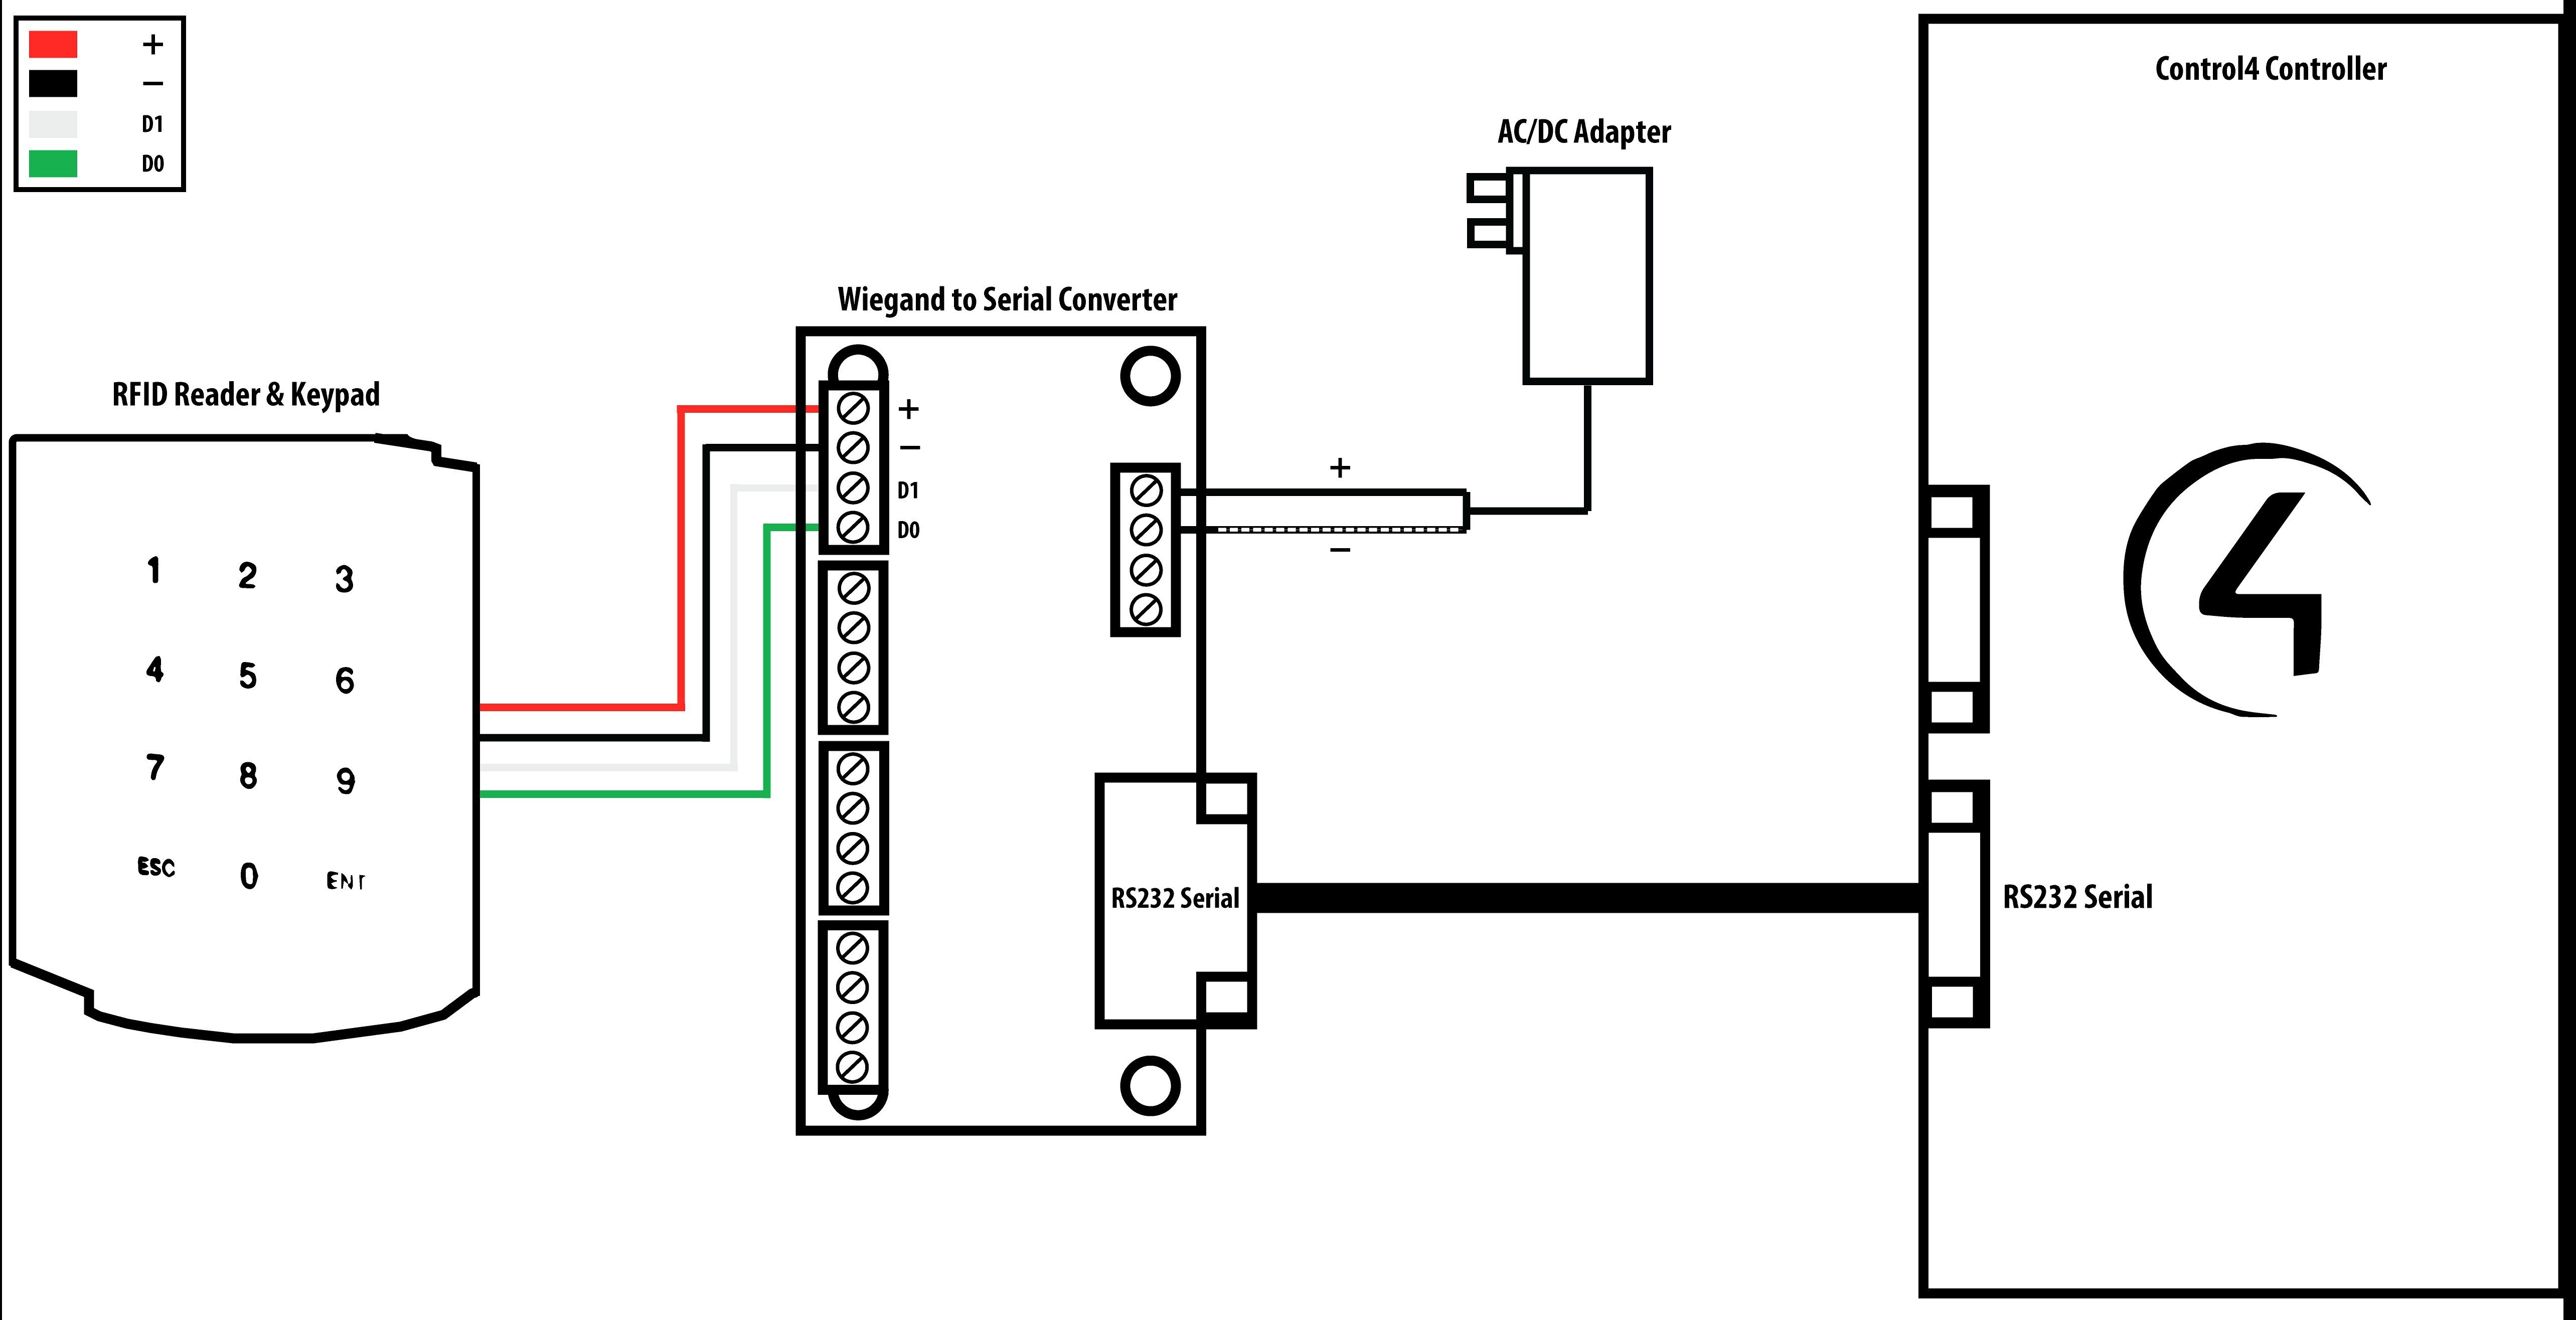 Control 4 Wiring Diagram Control 4 Wiring Diagram Elegant Control4 Light Switch Wiring Of Control 4 Wiring Diagram